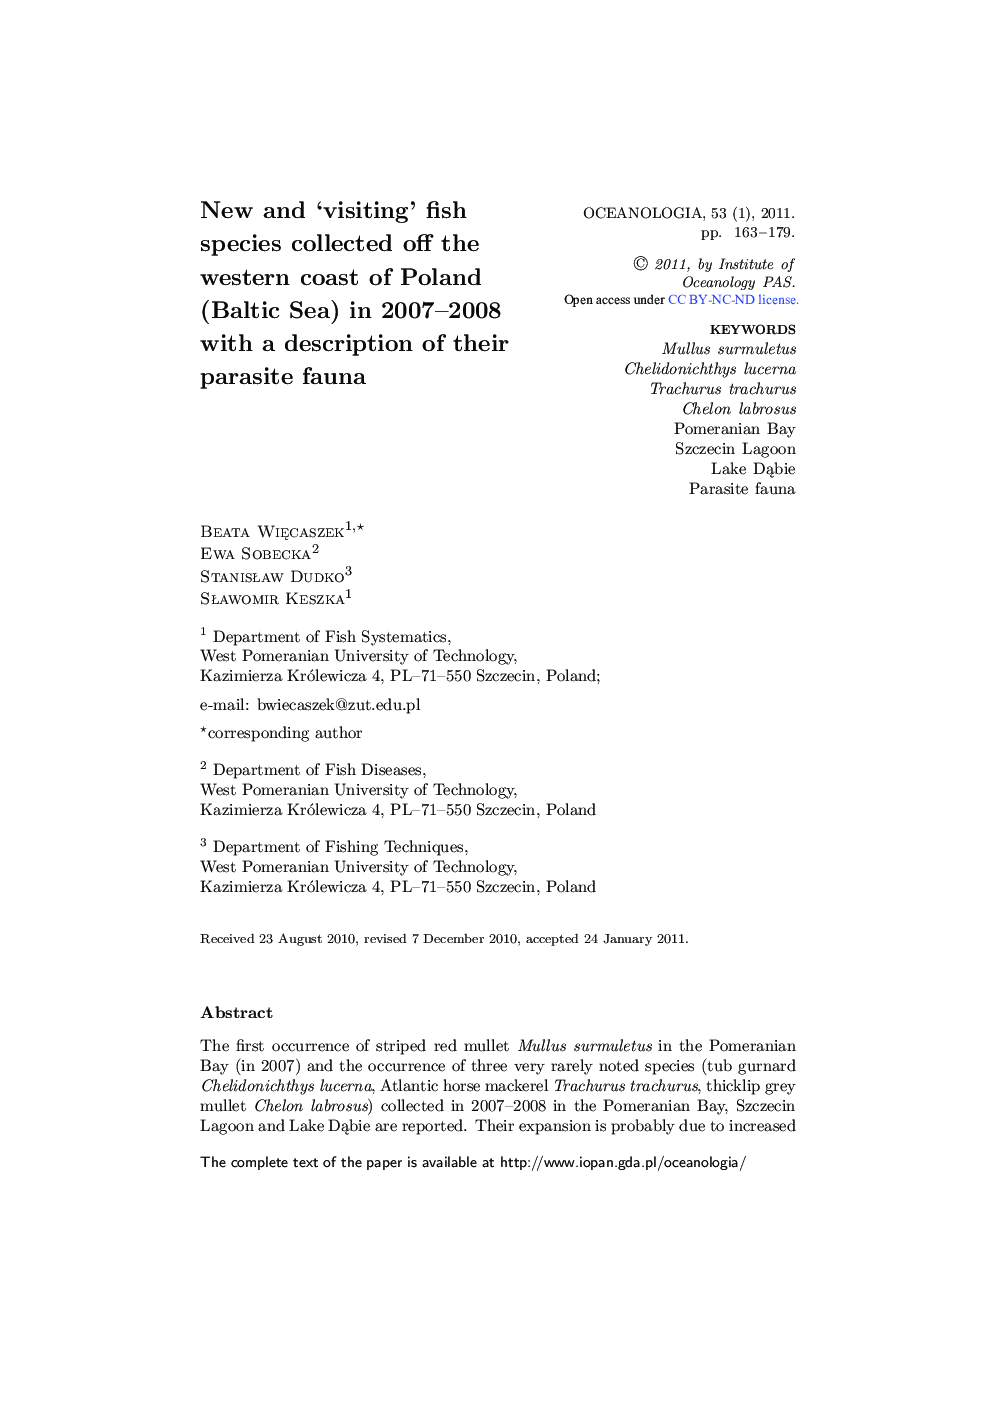 New and ‘visiting’ fish species collected off the western coast of Poland (Baltic Sea) in 2007–2008 with a description of their parasite fauna 